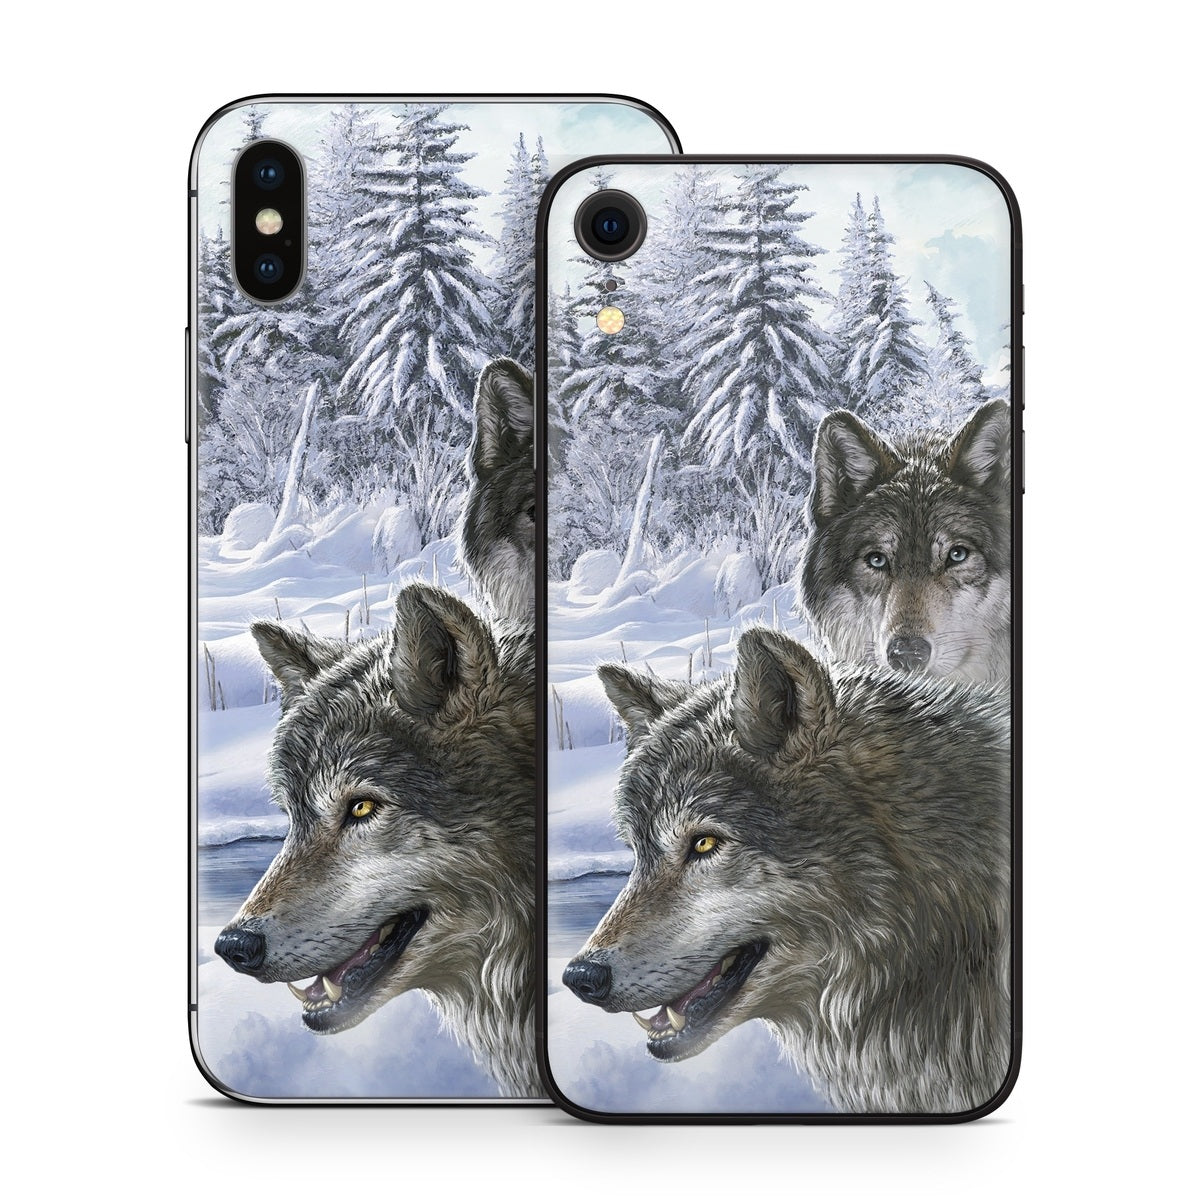 Snow Wolves - Apple iPhone X Skin